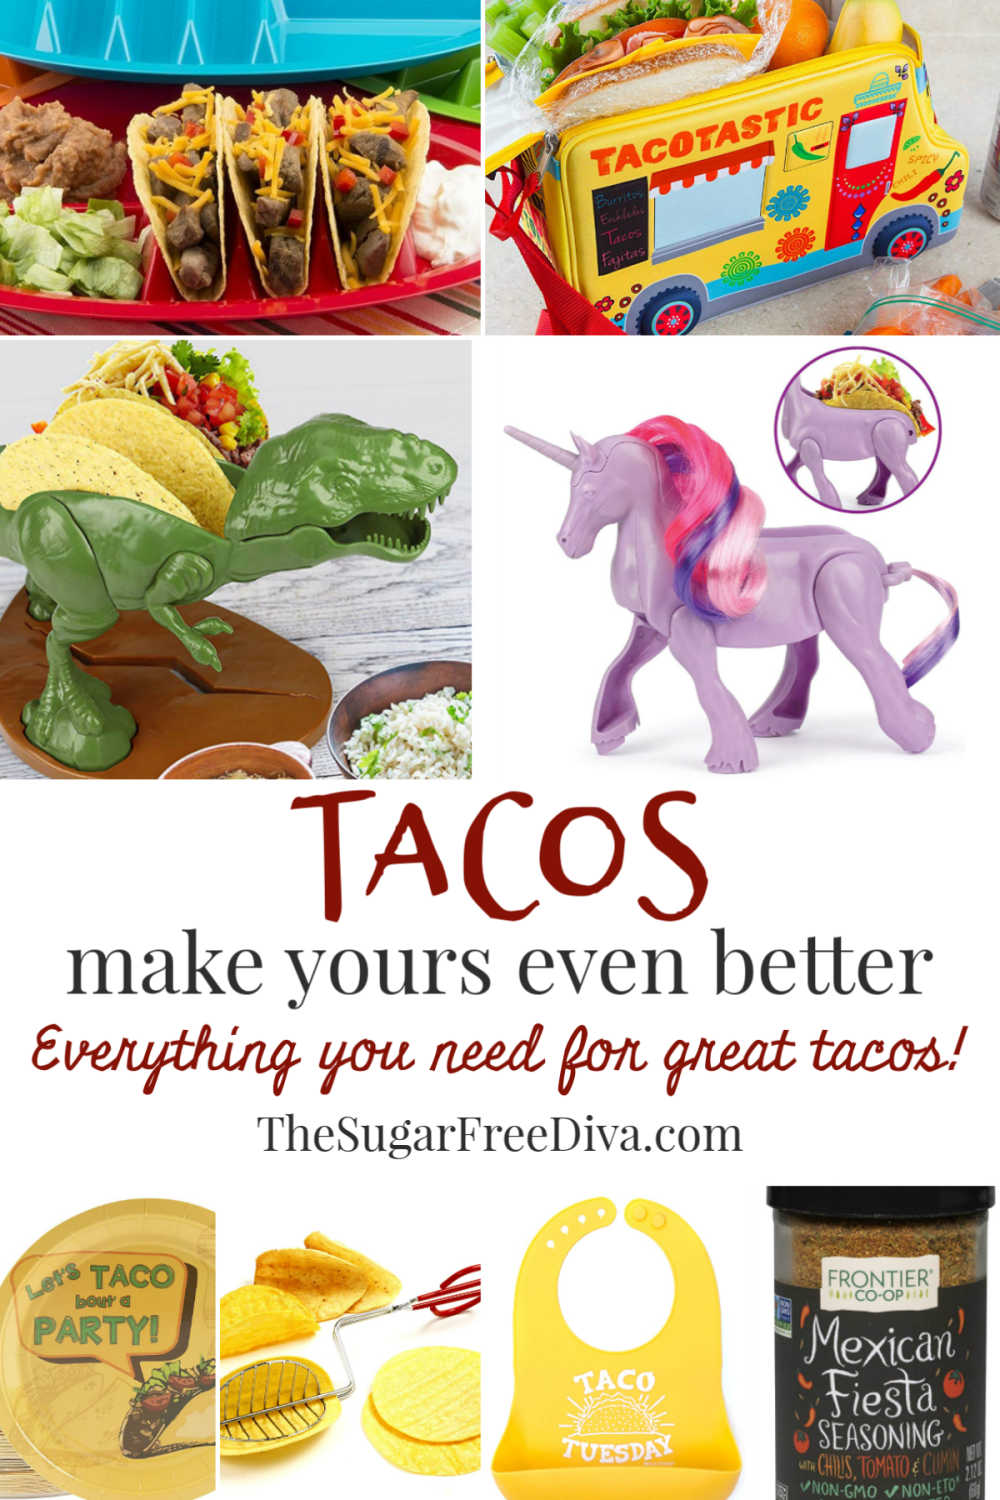 Everything You Need to Eat Tacos!